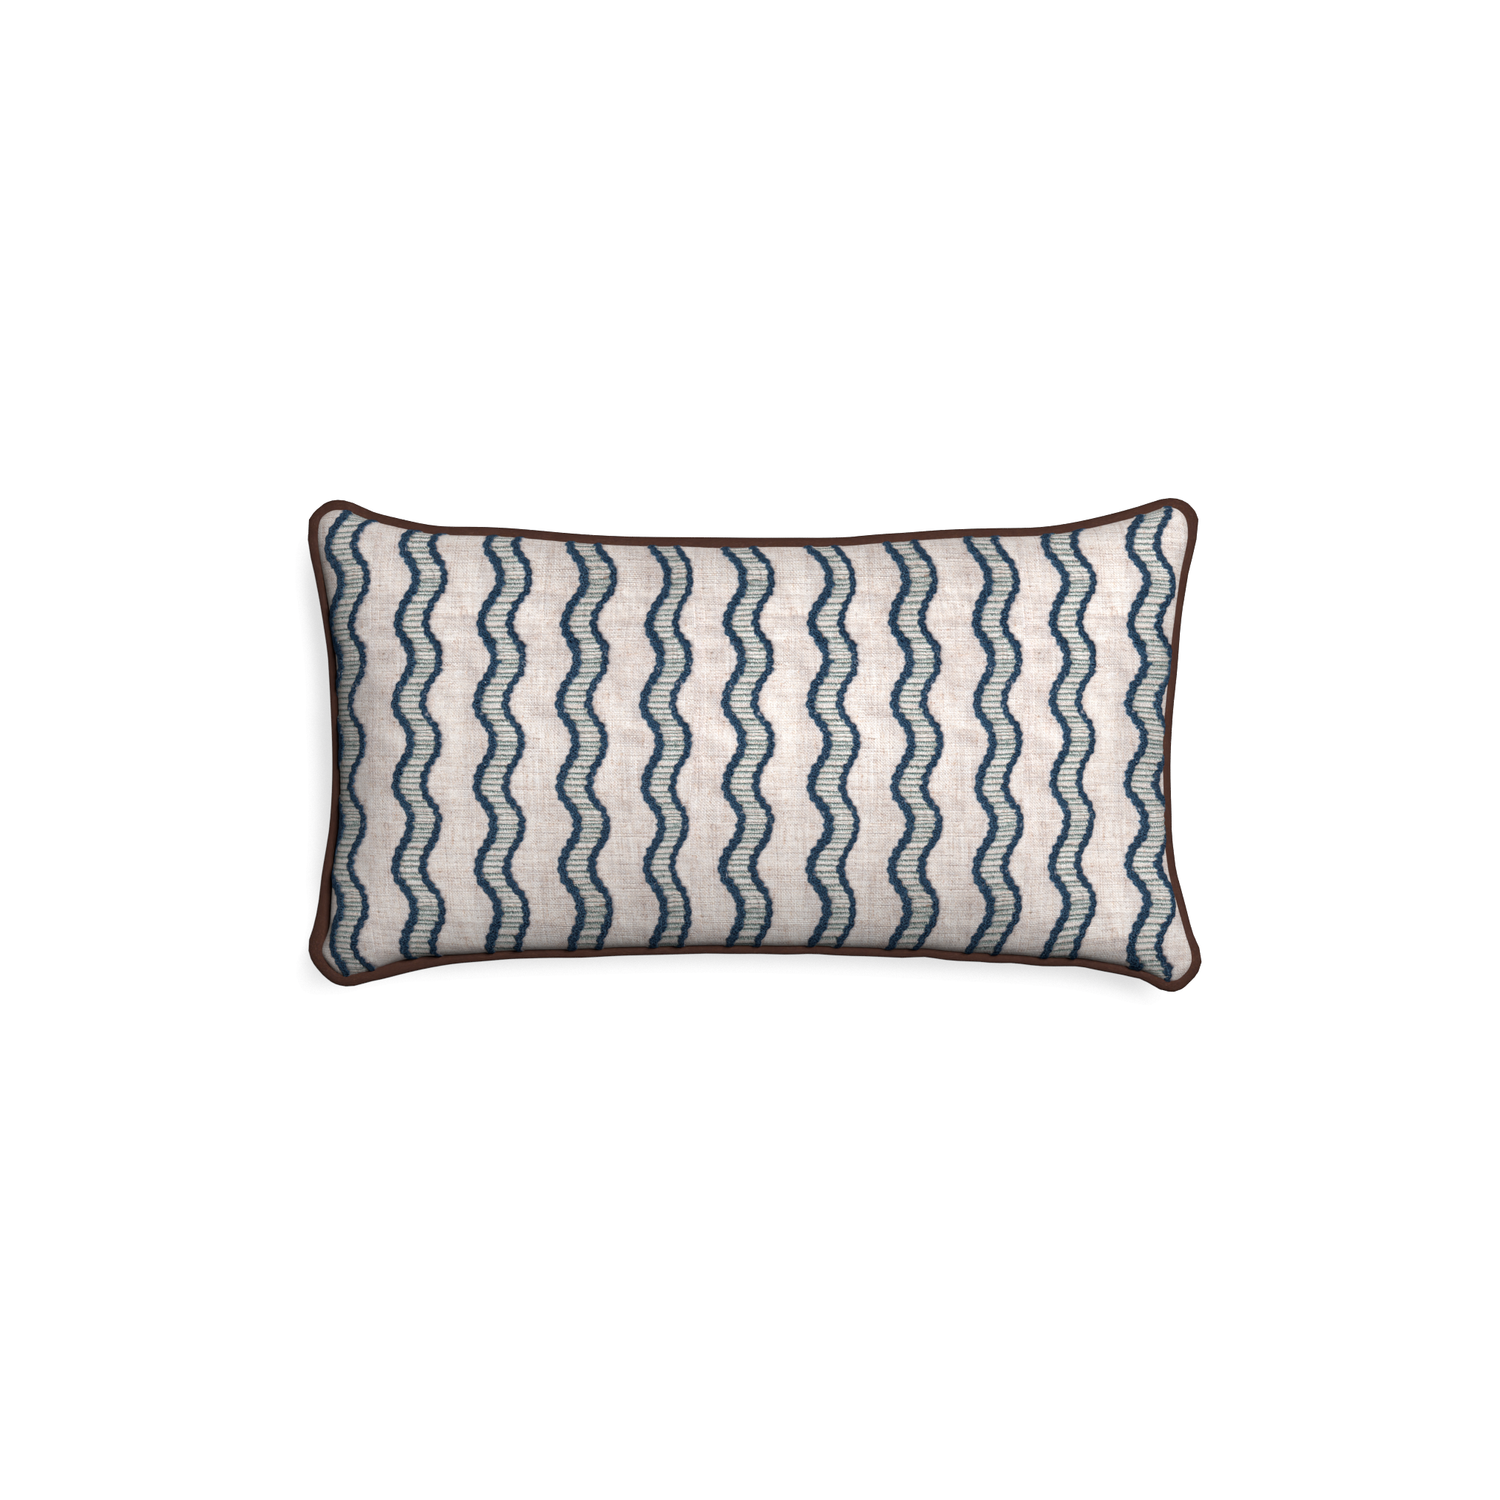 Petite-lumbar beatrice custom embroidered wavepillow with w piping on white background